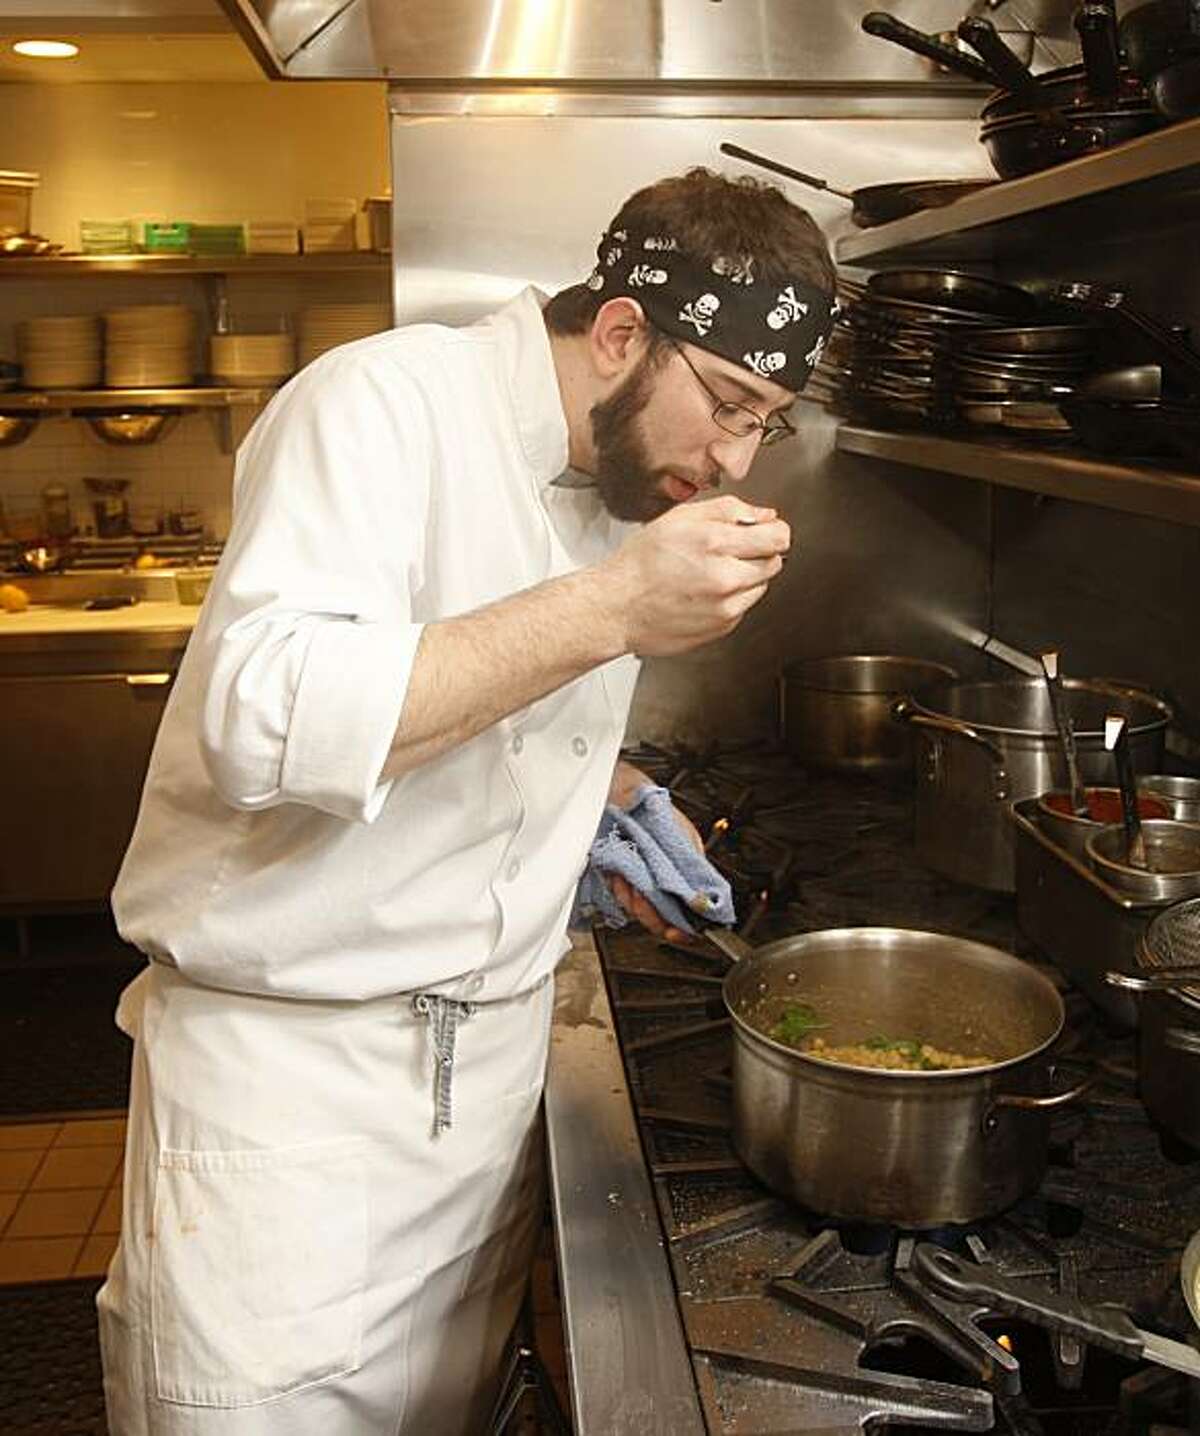 Justin Simoneaux wi,ll be chef at Boxing Room in San Francisco, when it opens early next year.